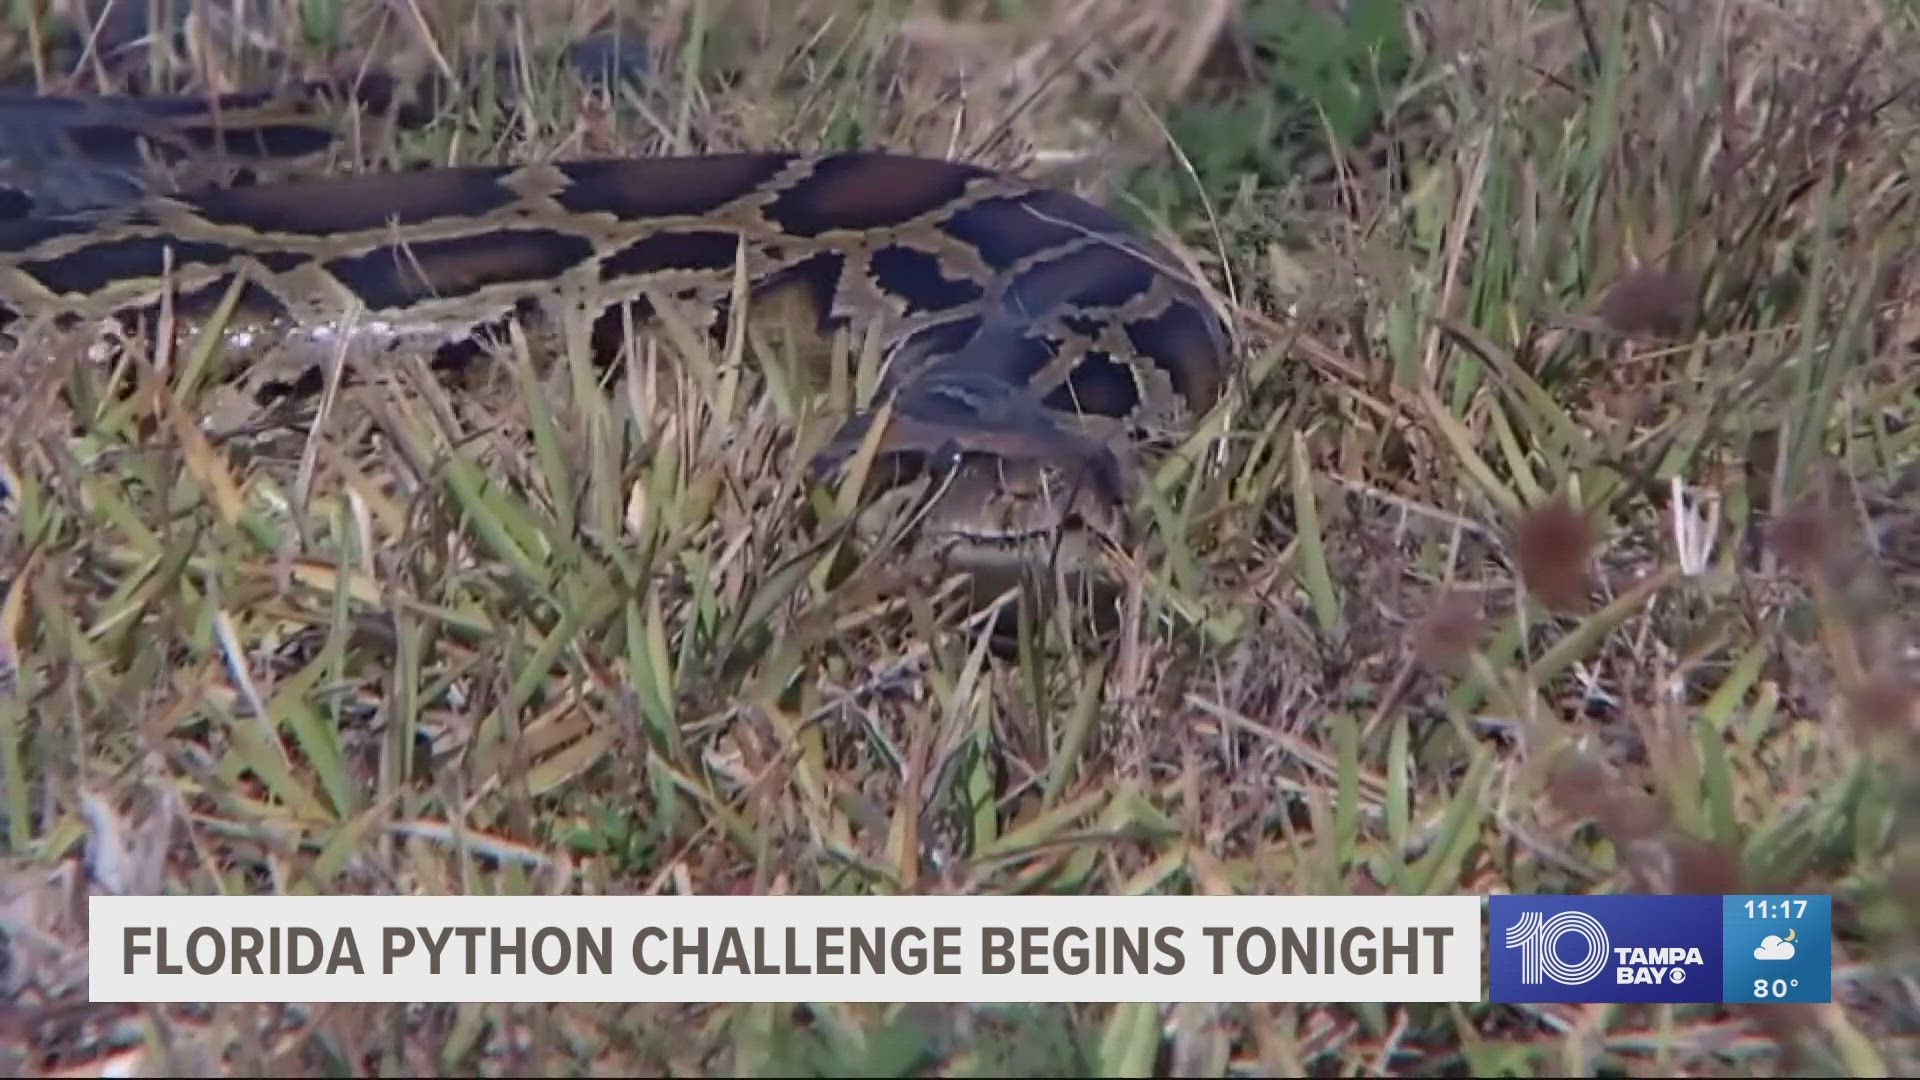 Over the next 10 days, people from around the world will set out to remove the invasive snake from Florida.